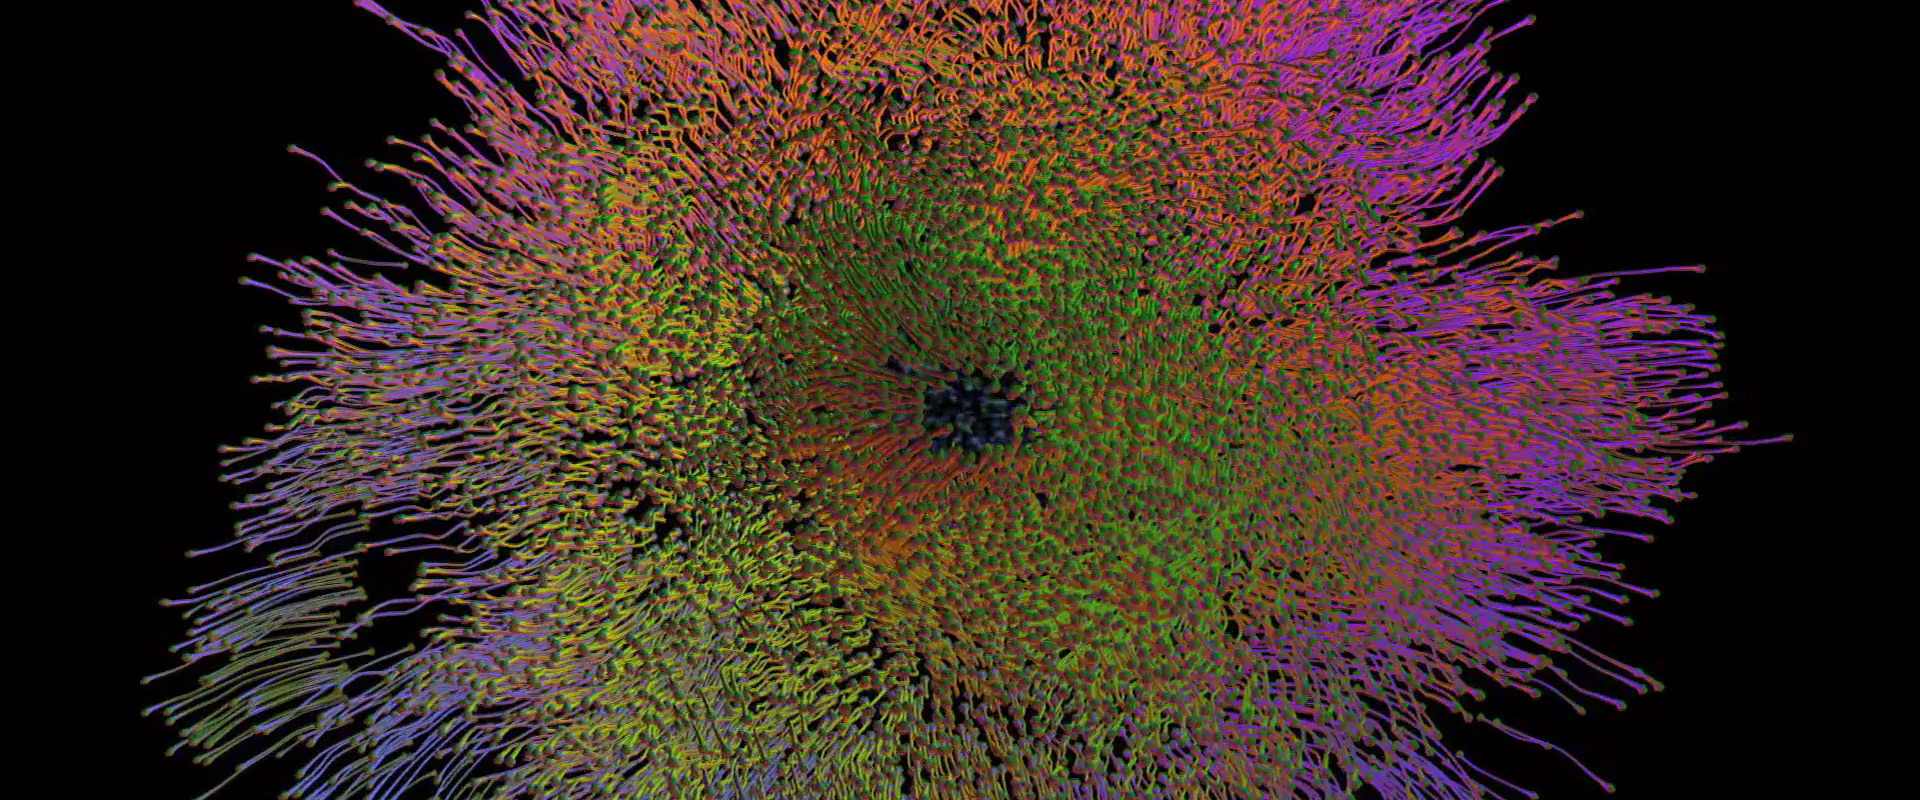 color pattern, psychedelic imagery in The Cell